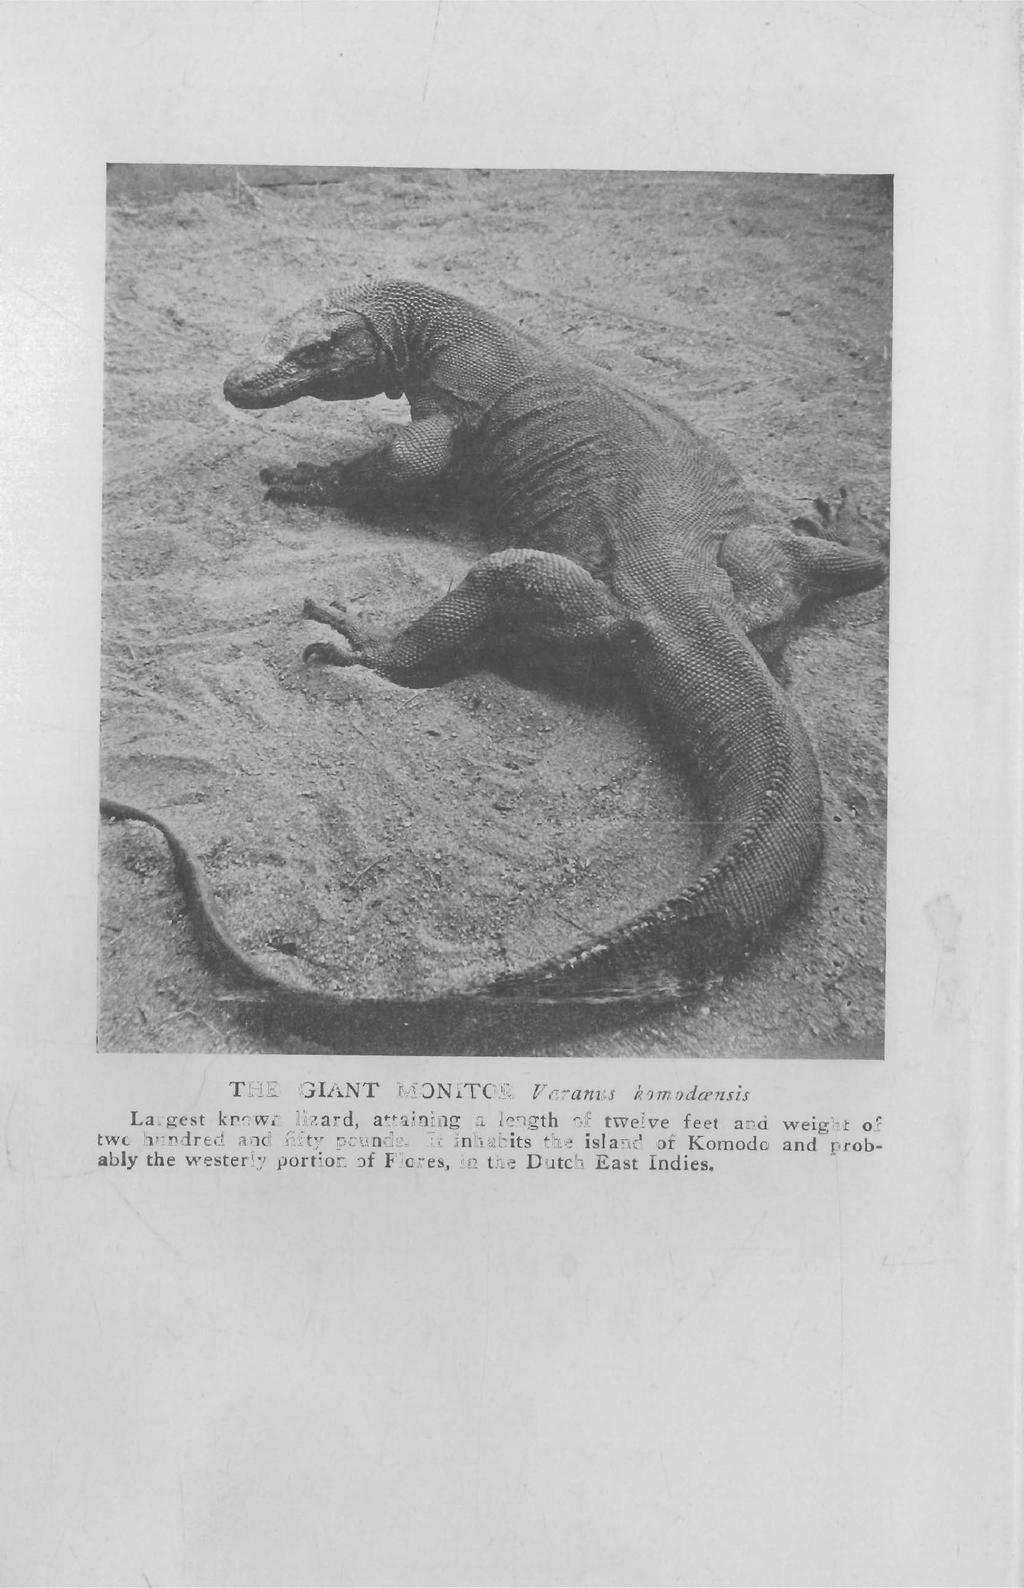 THE GIANT MONITOR Vaanlts komodamsis Largest known lizard, attaining a ledgth of twelve feet and weight of two hundred